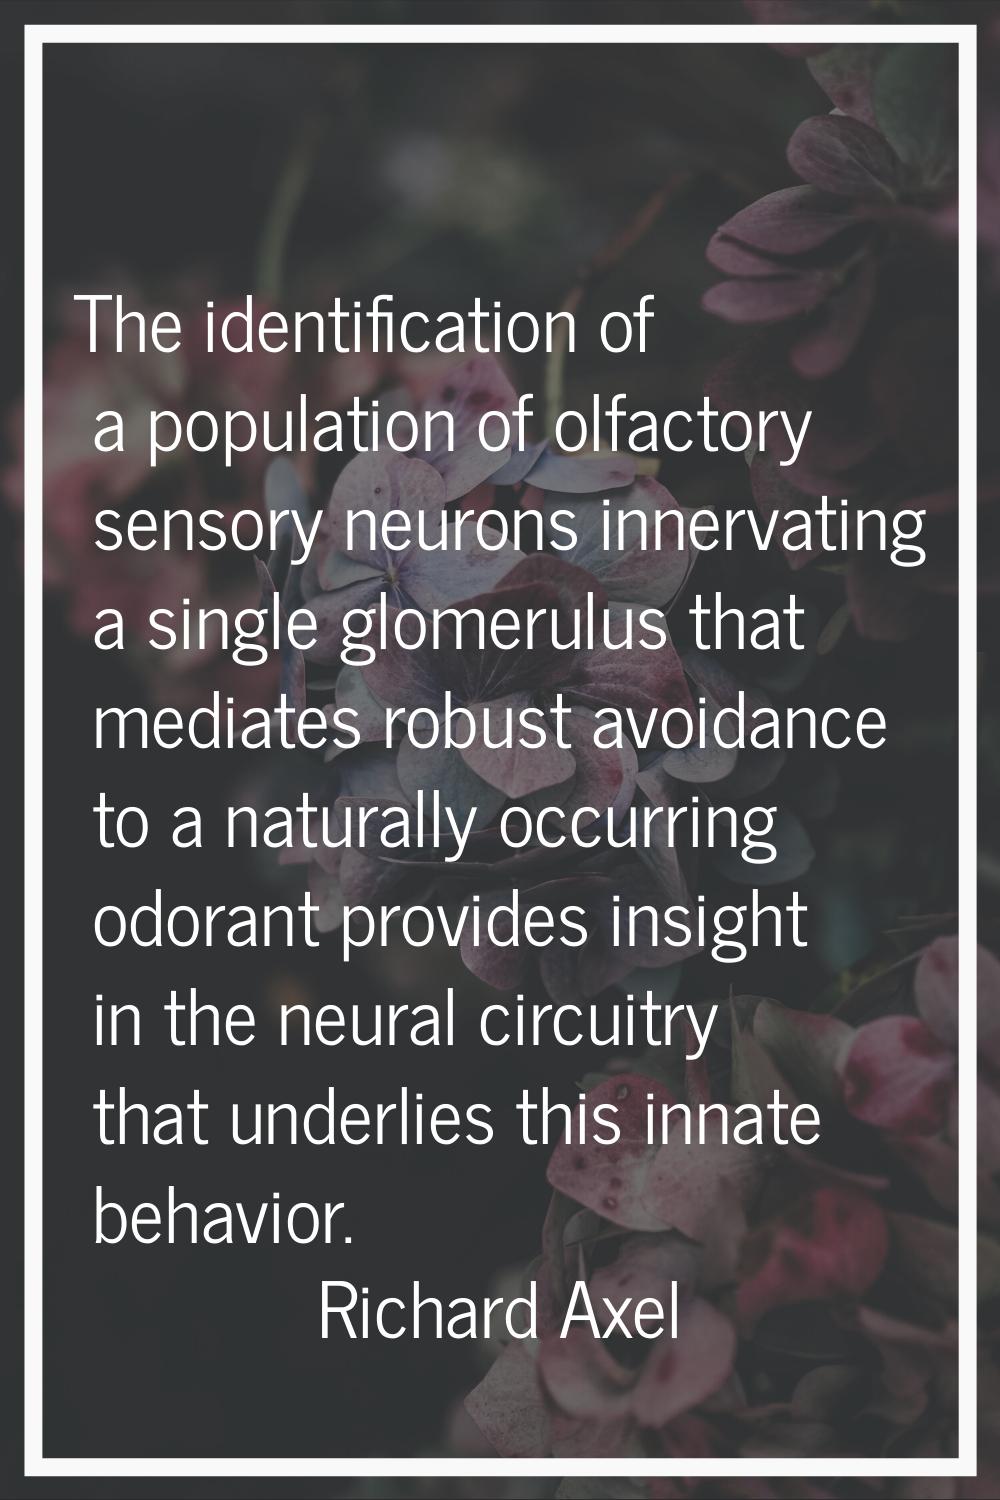 The identification of a population of olfactory sensory neurons innervating a single glomerulus tha